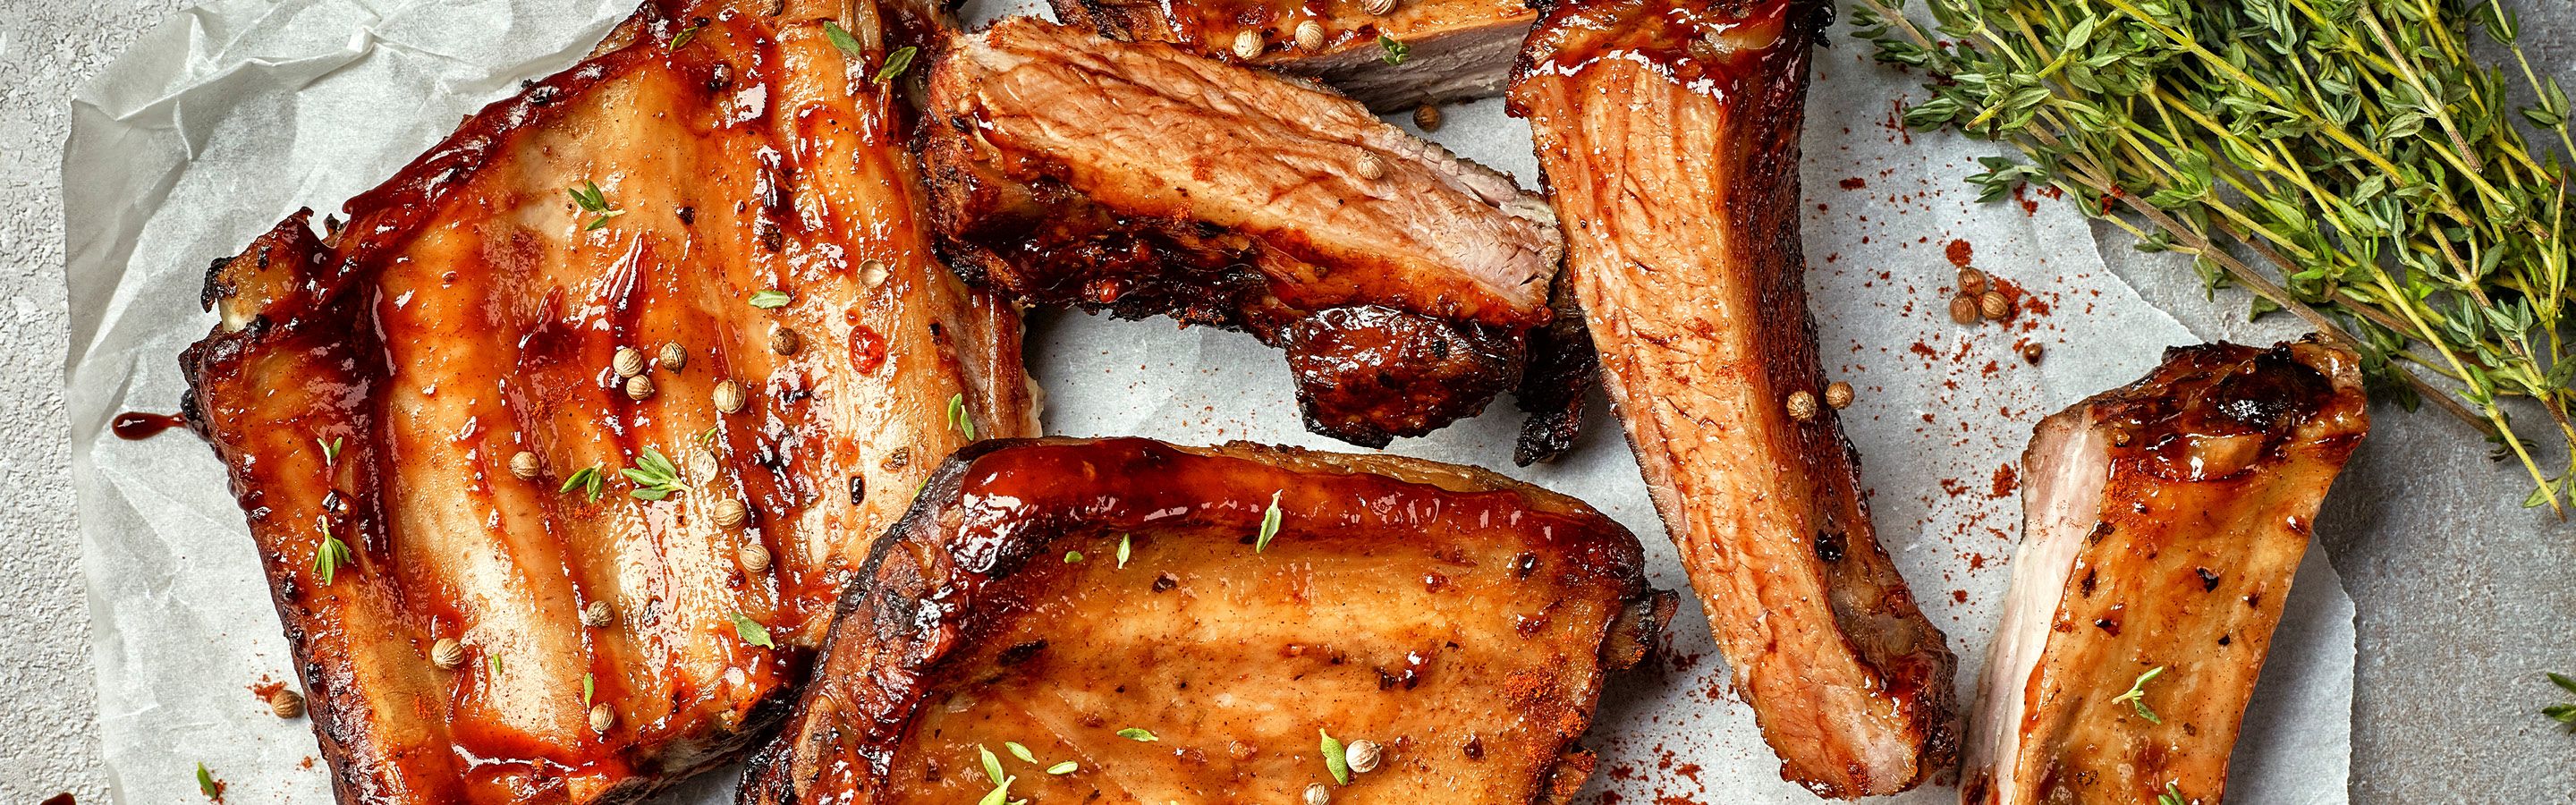 St. Louis-Style Ribs with Tangy Tomato BBQ Sauce